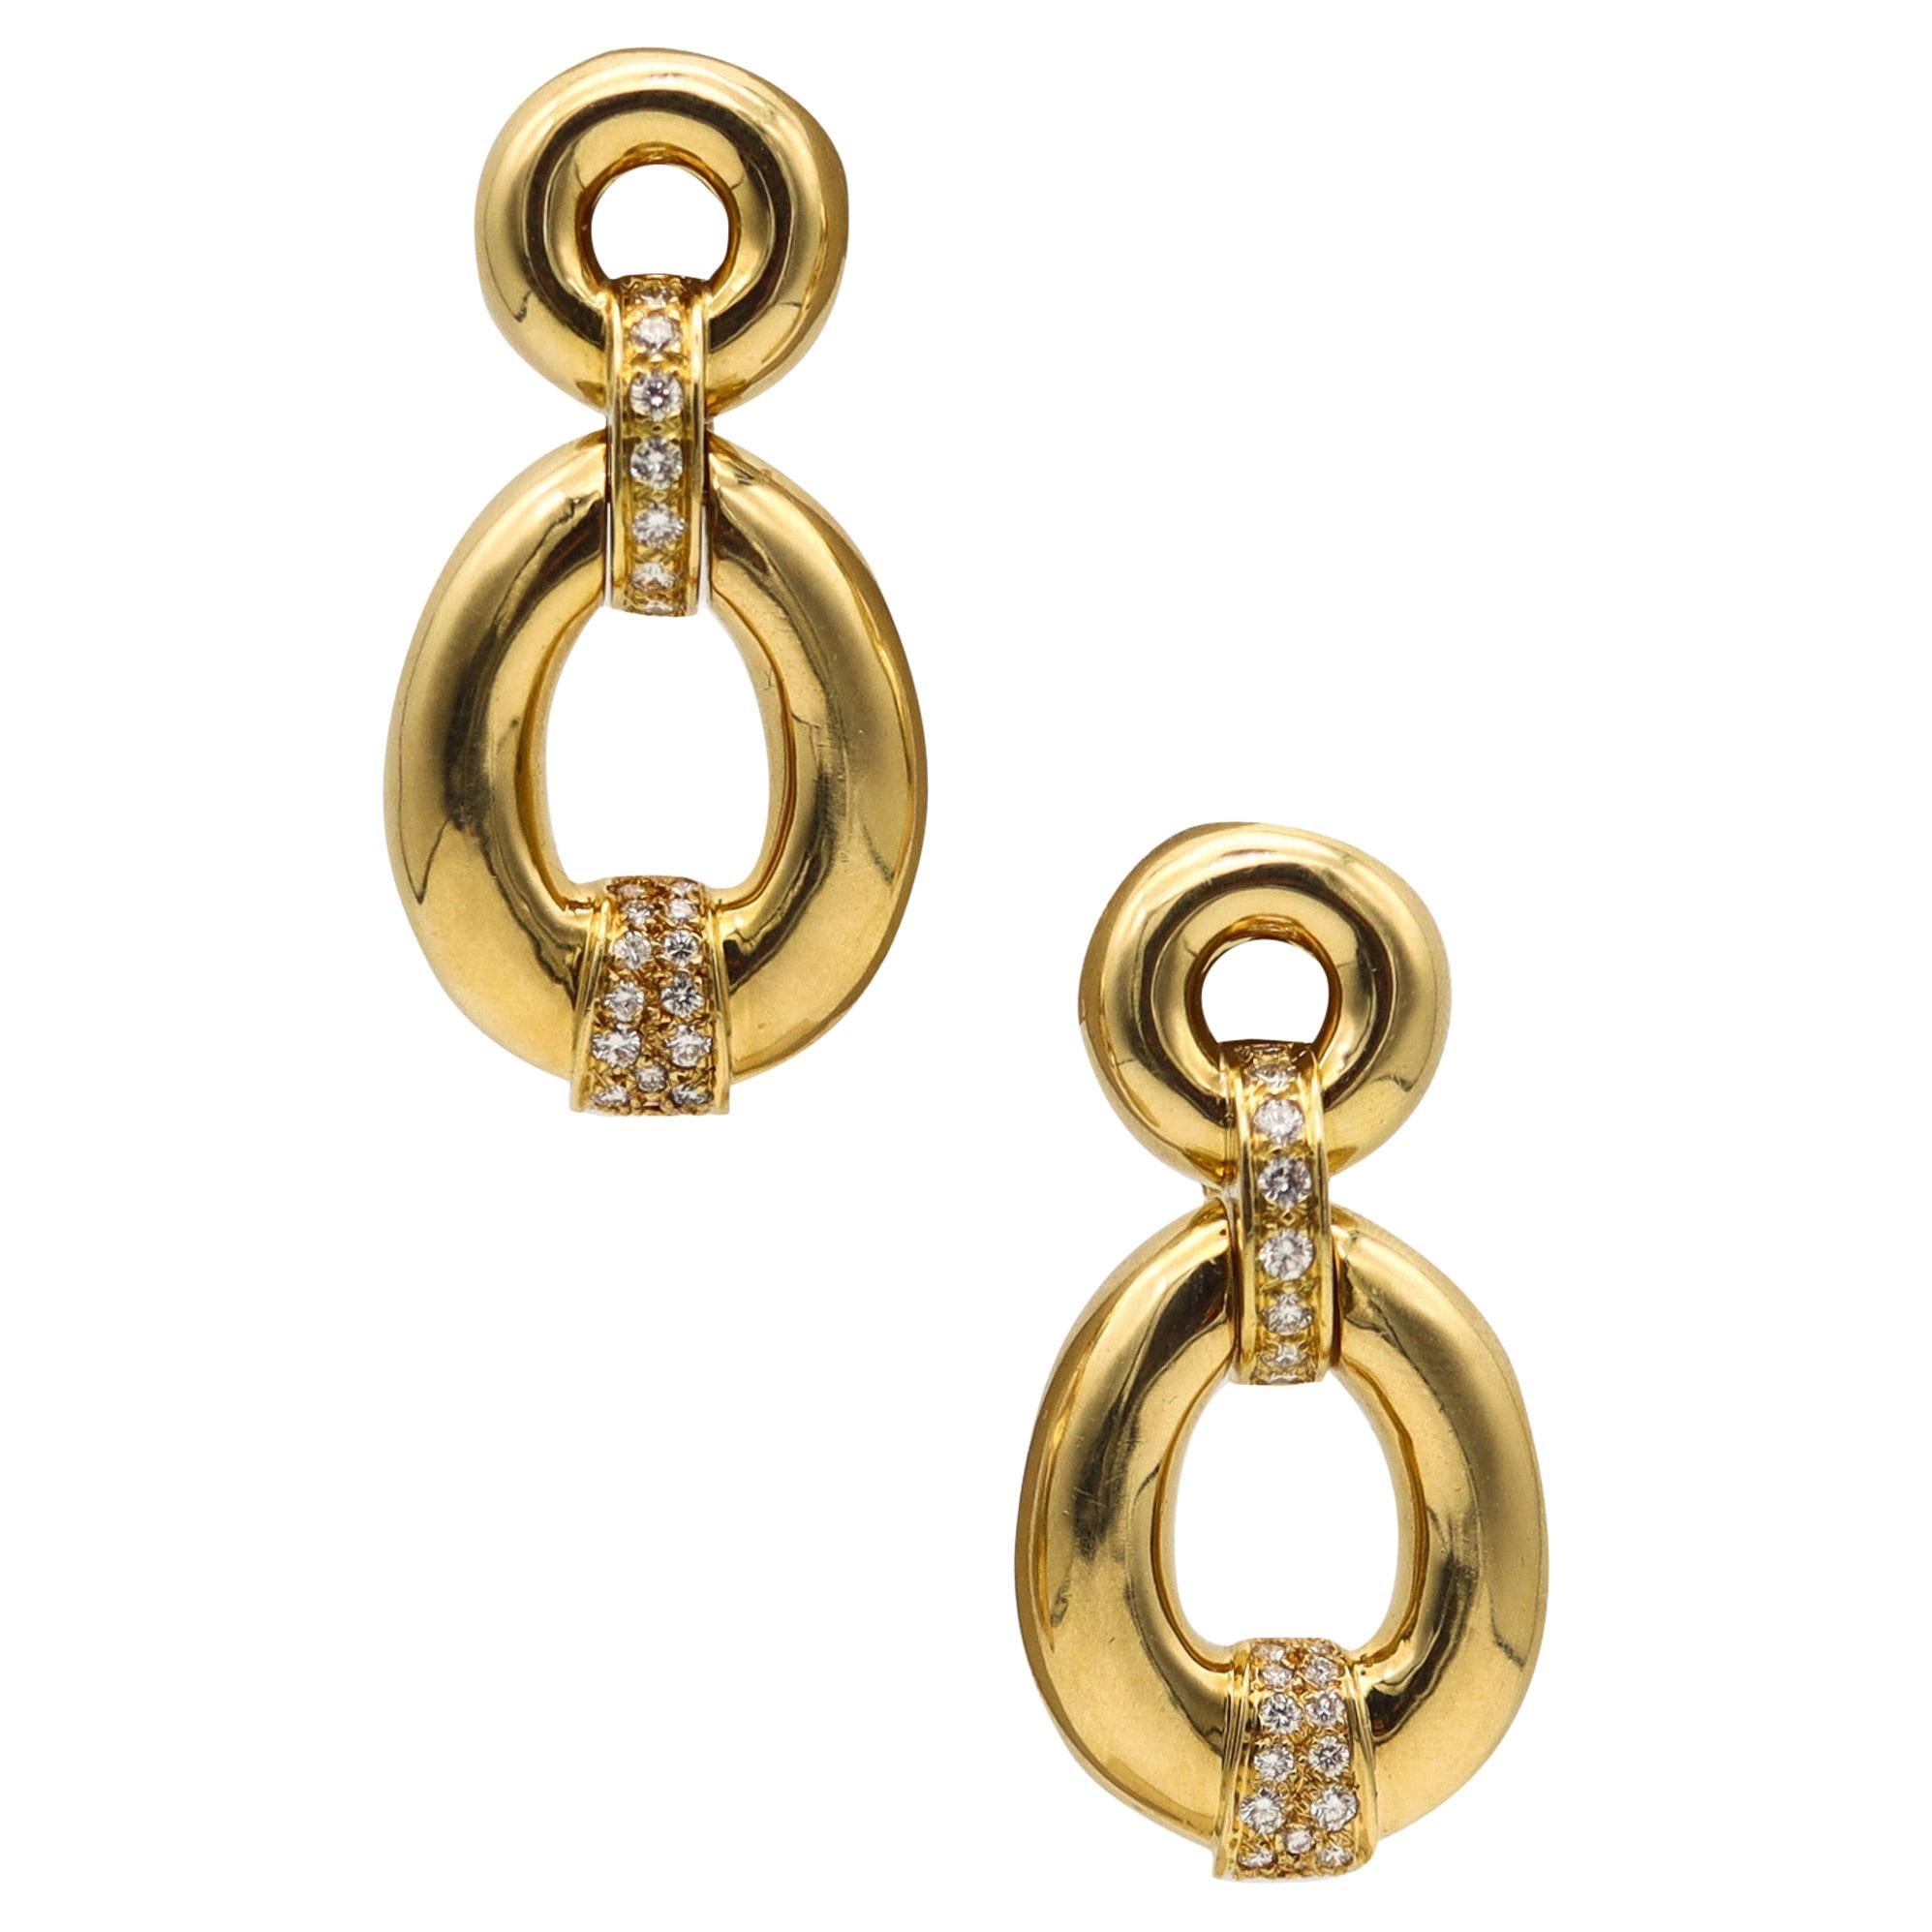 Fred Paris Door Knockers Earrings In 18Kt Yellow Gold With 2.40 Ctw VS Diamonds For Sale